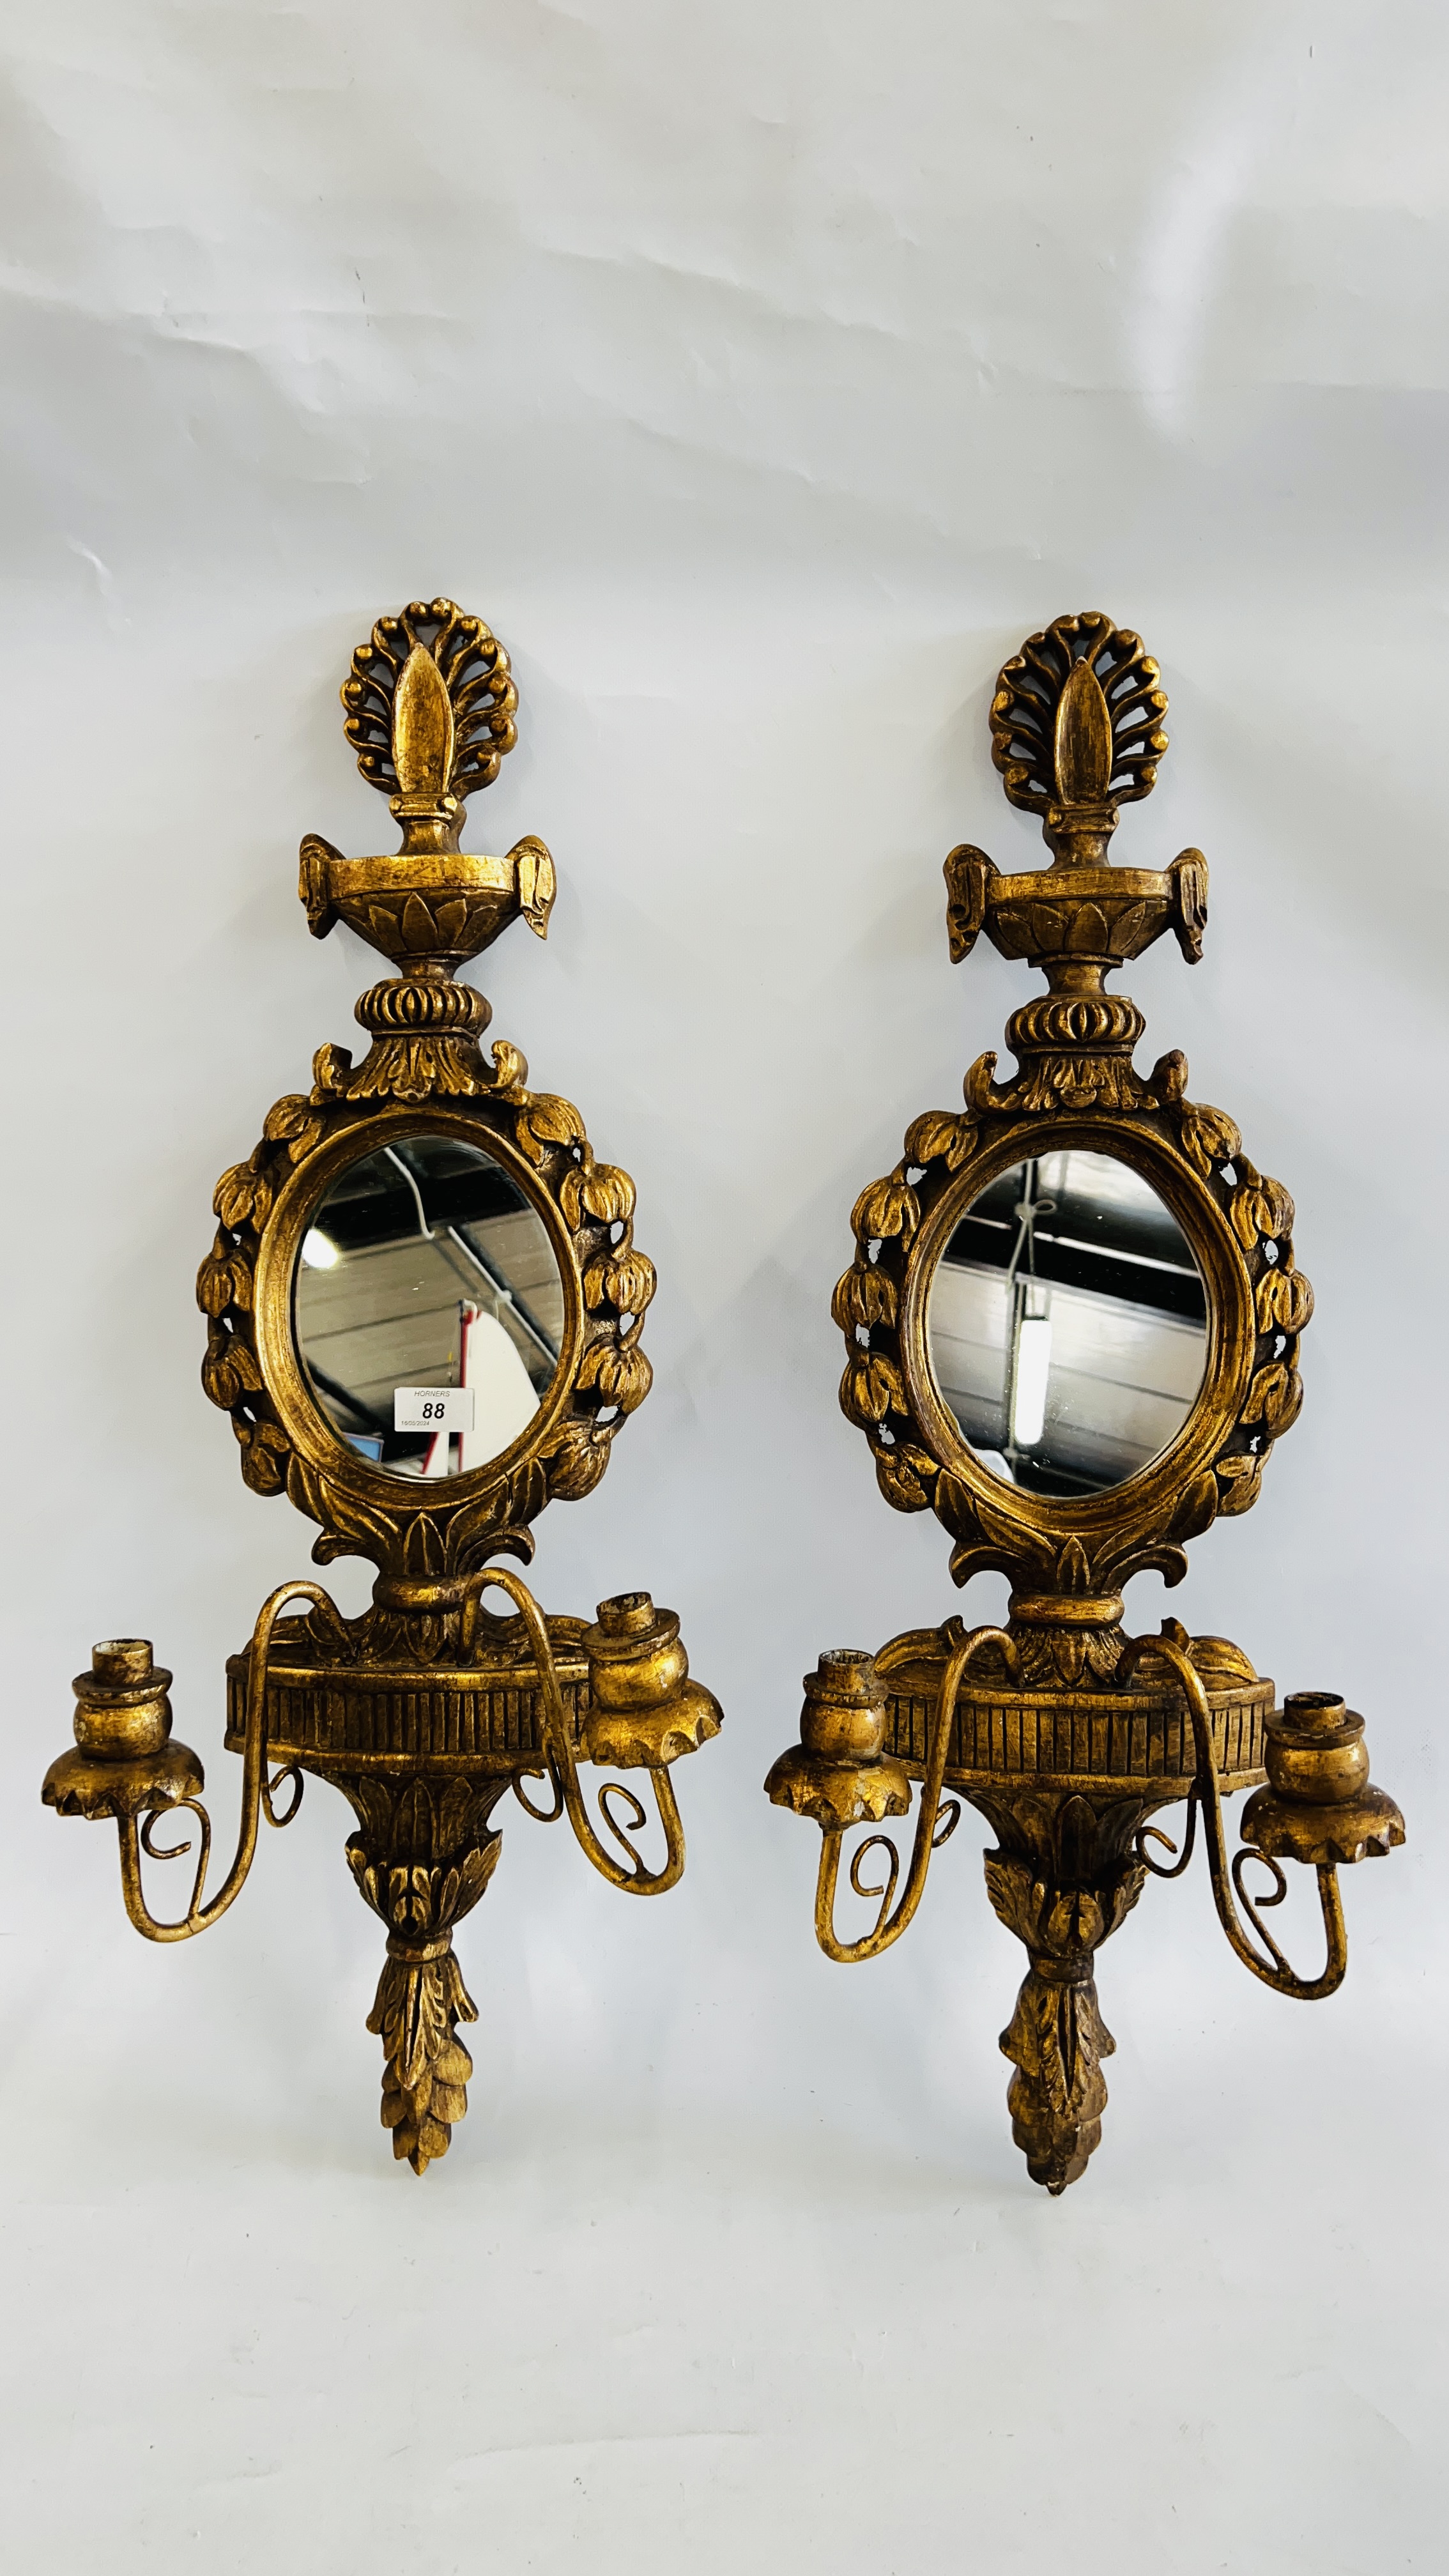 A PAIR OF ELABORATE GILT FINISH TWO BRANCH WALL SCONCES WITH MIRRORED INSERTS H 76CM.